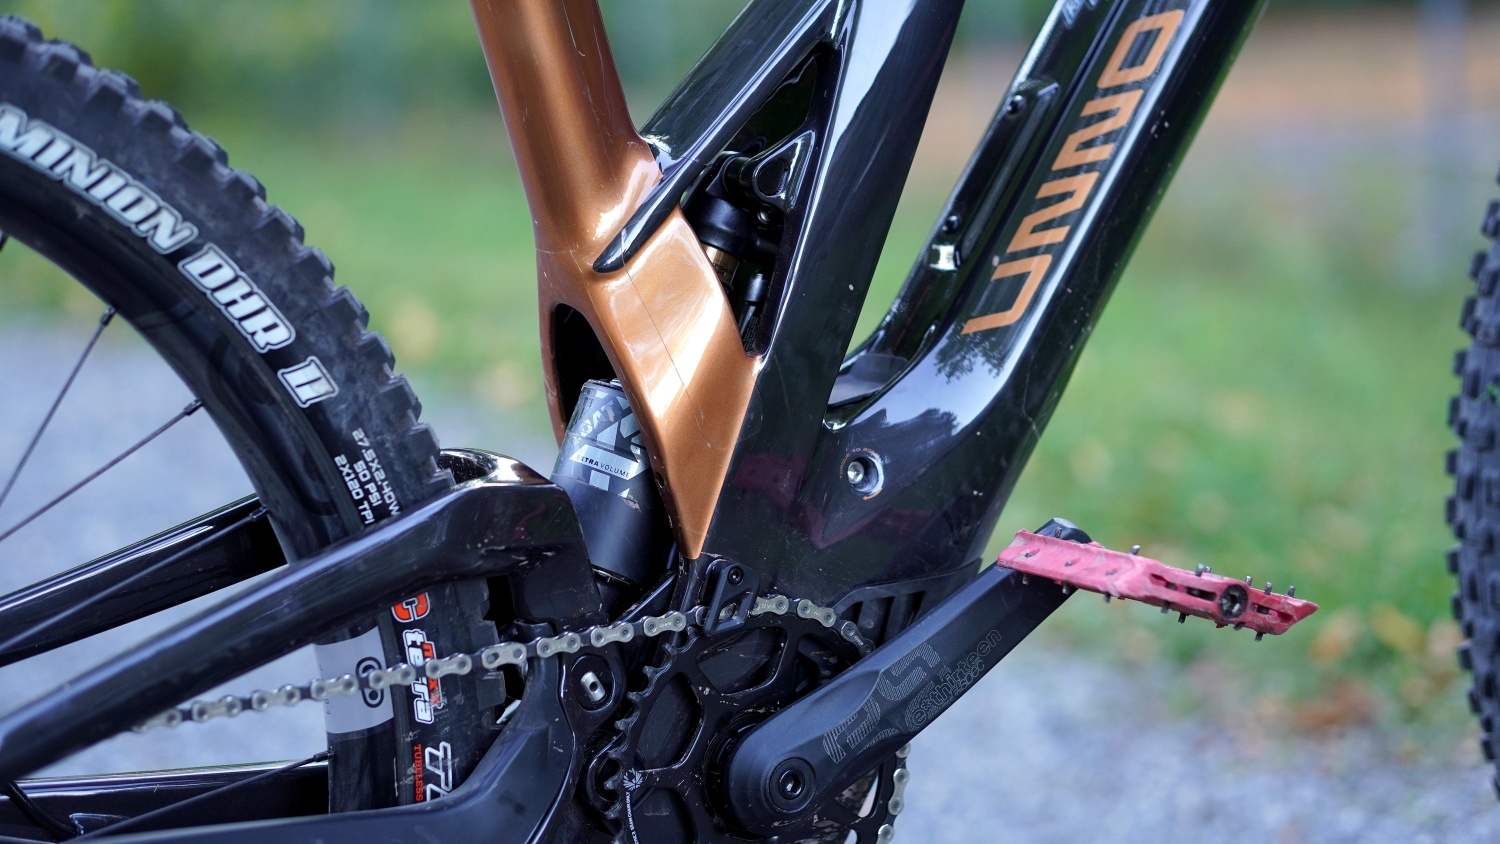 The Fox X2 shock sits inside the seat tube